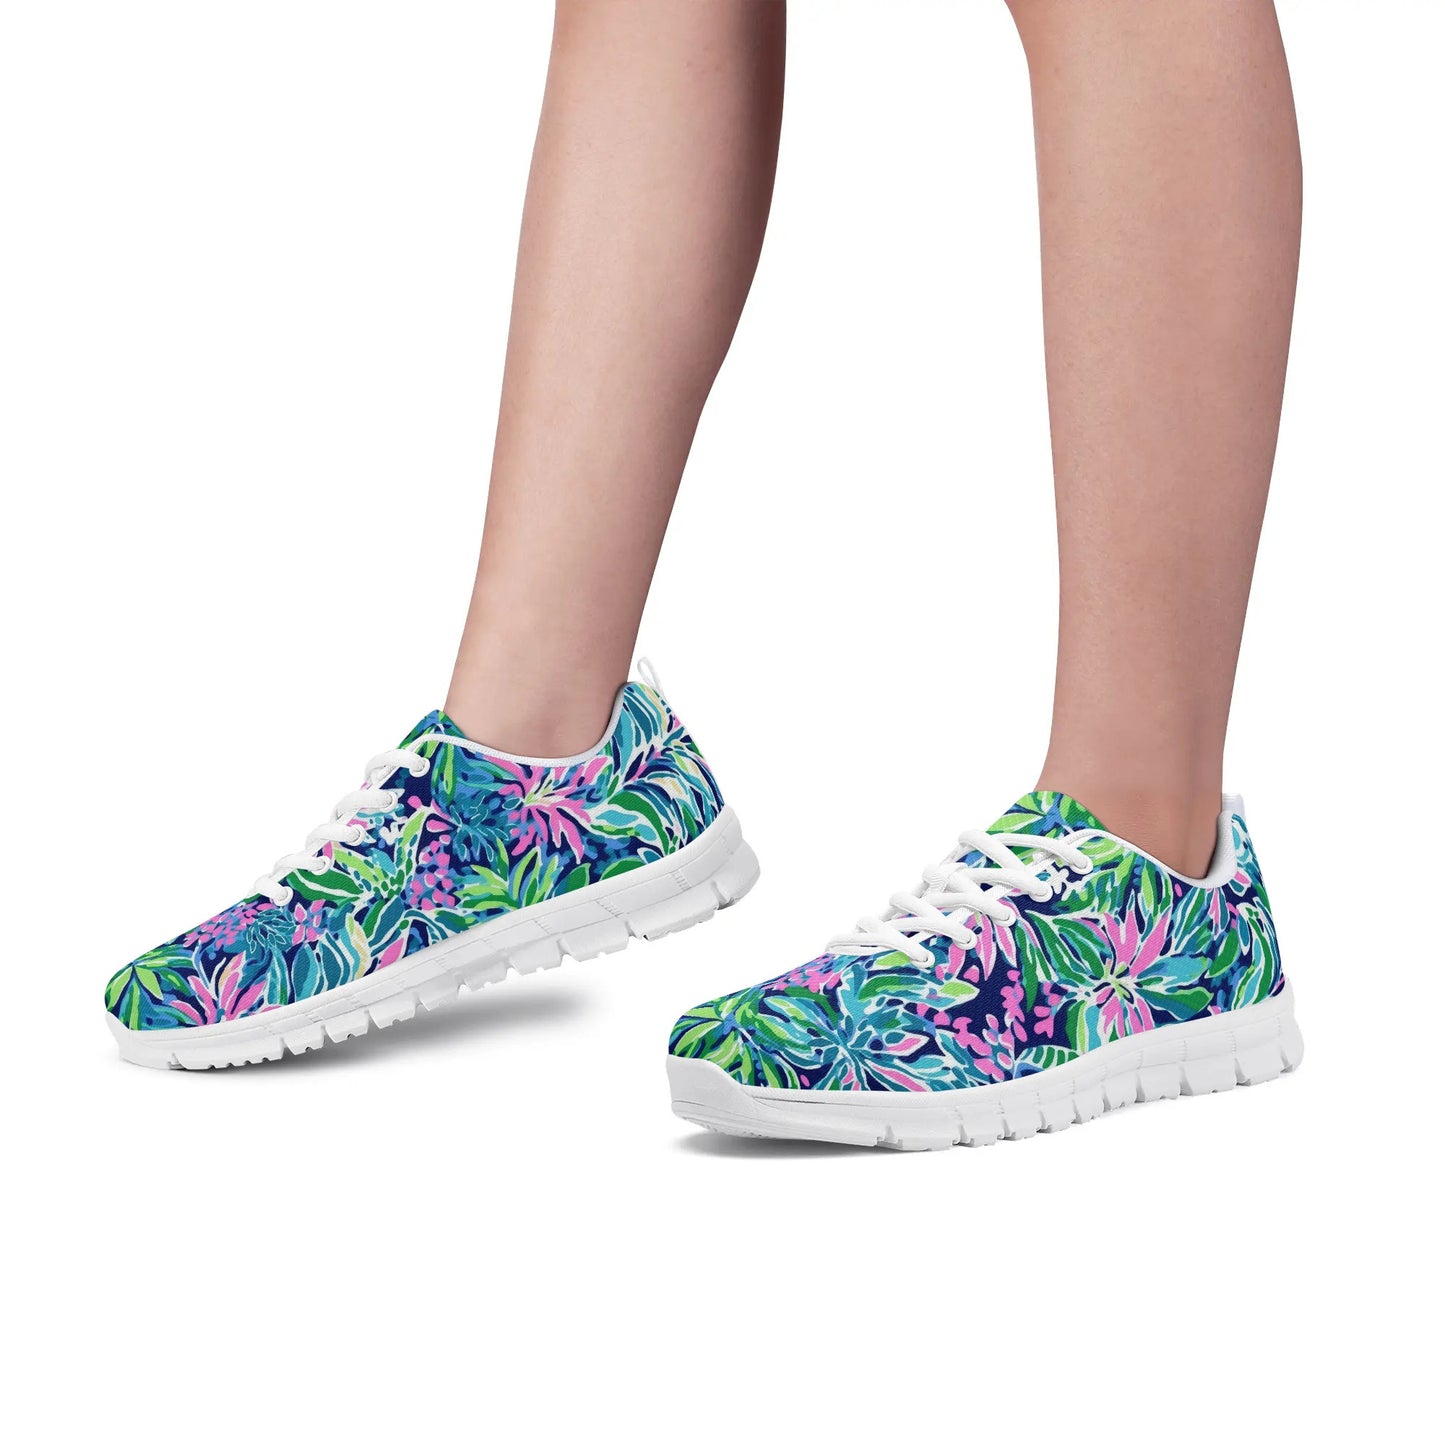 Seaside Blossoms: Coastal Spring Flowers in Pink, Green, and Navy Watercolors Womens EVA Mesh Running Shoes US5-US12